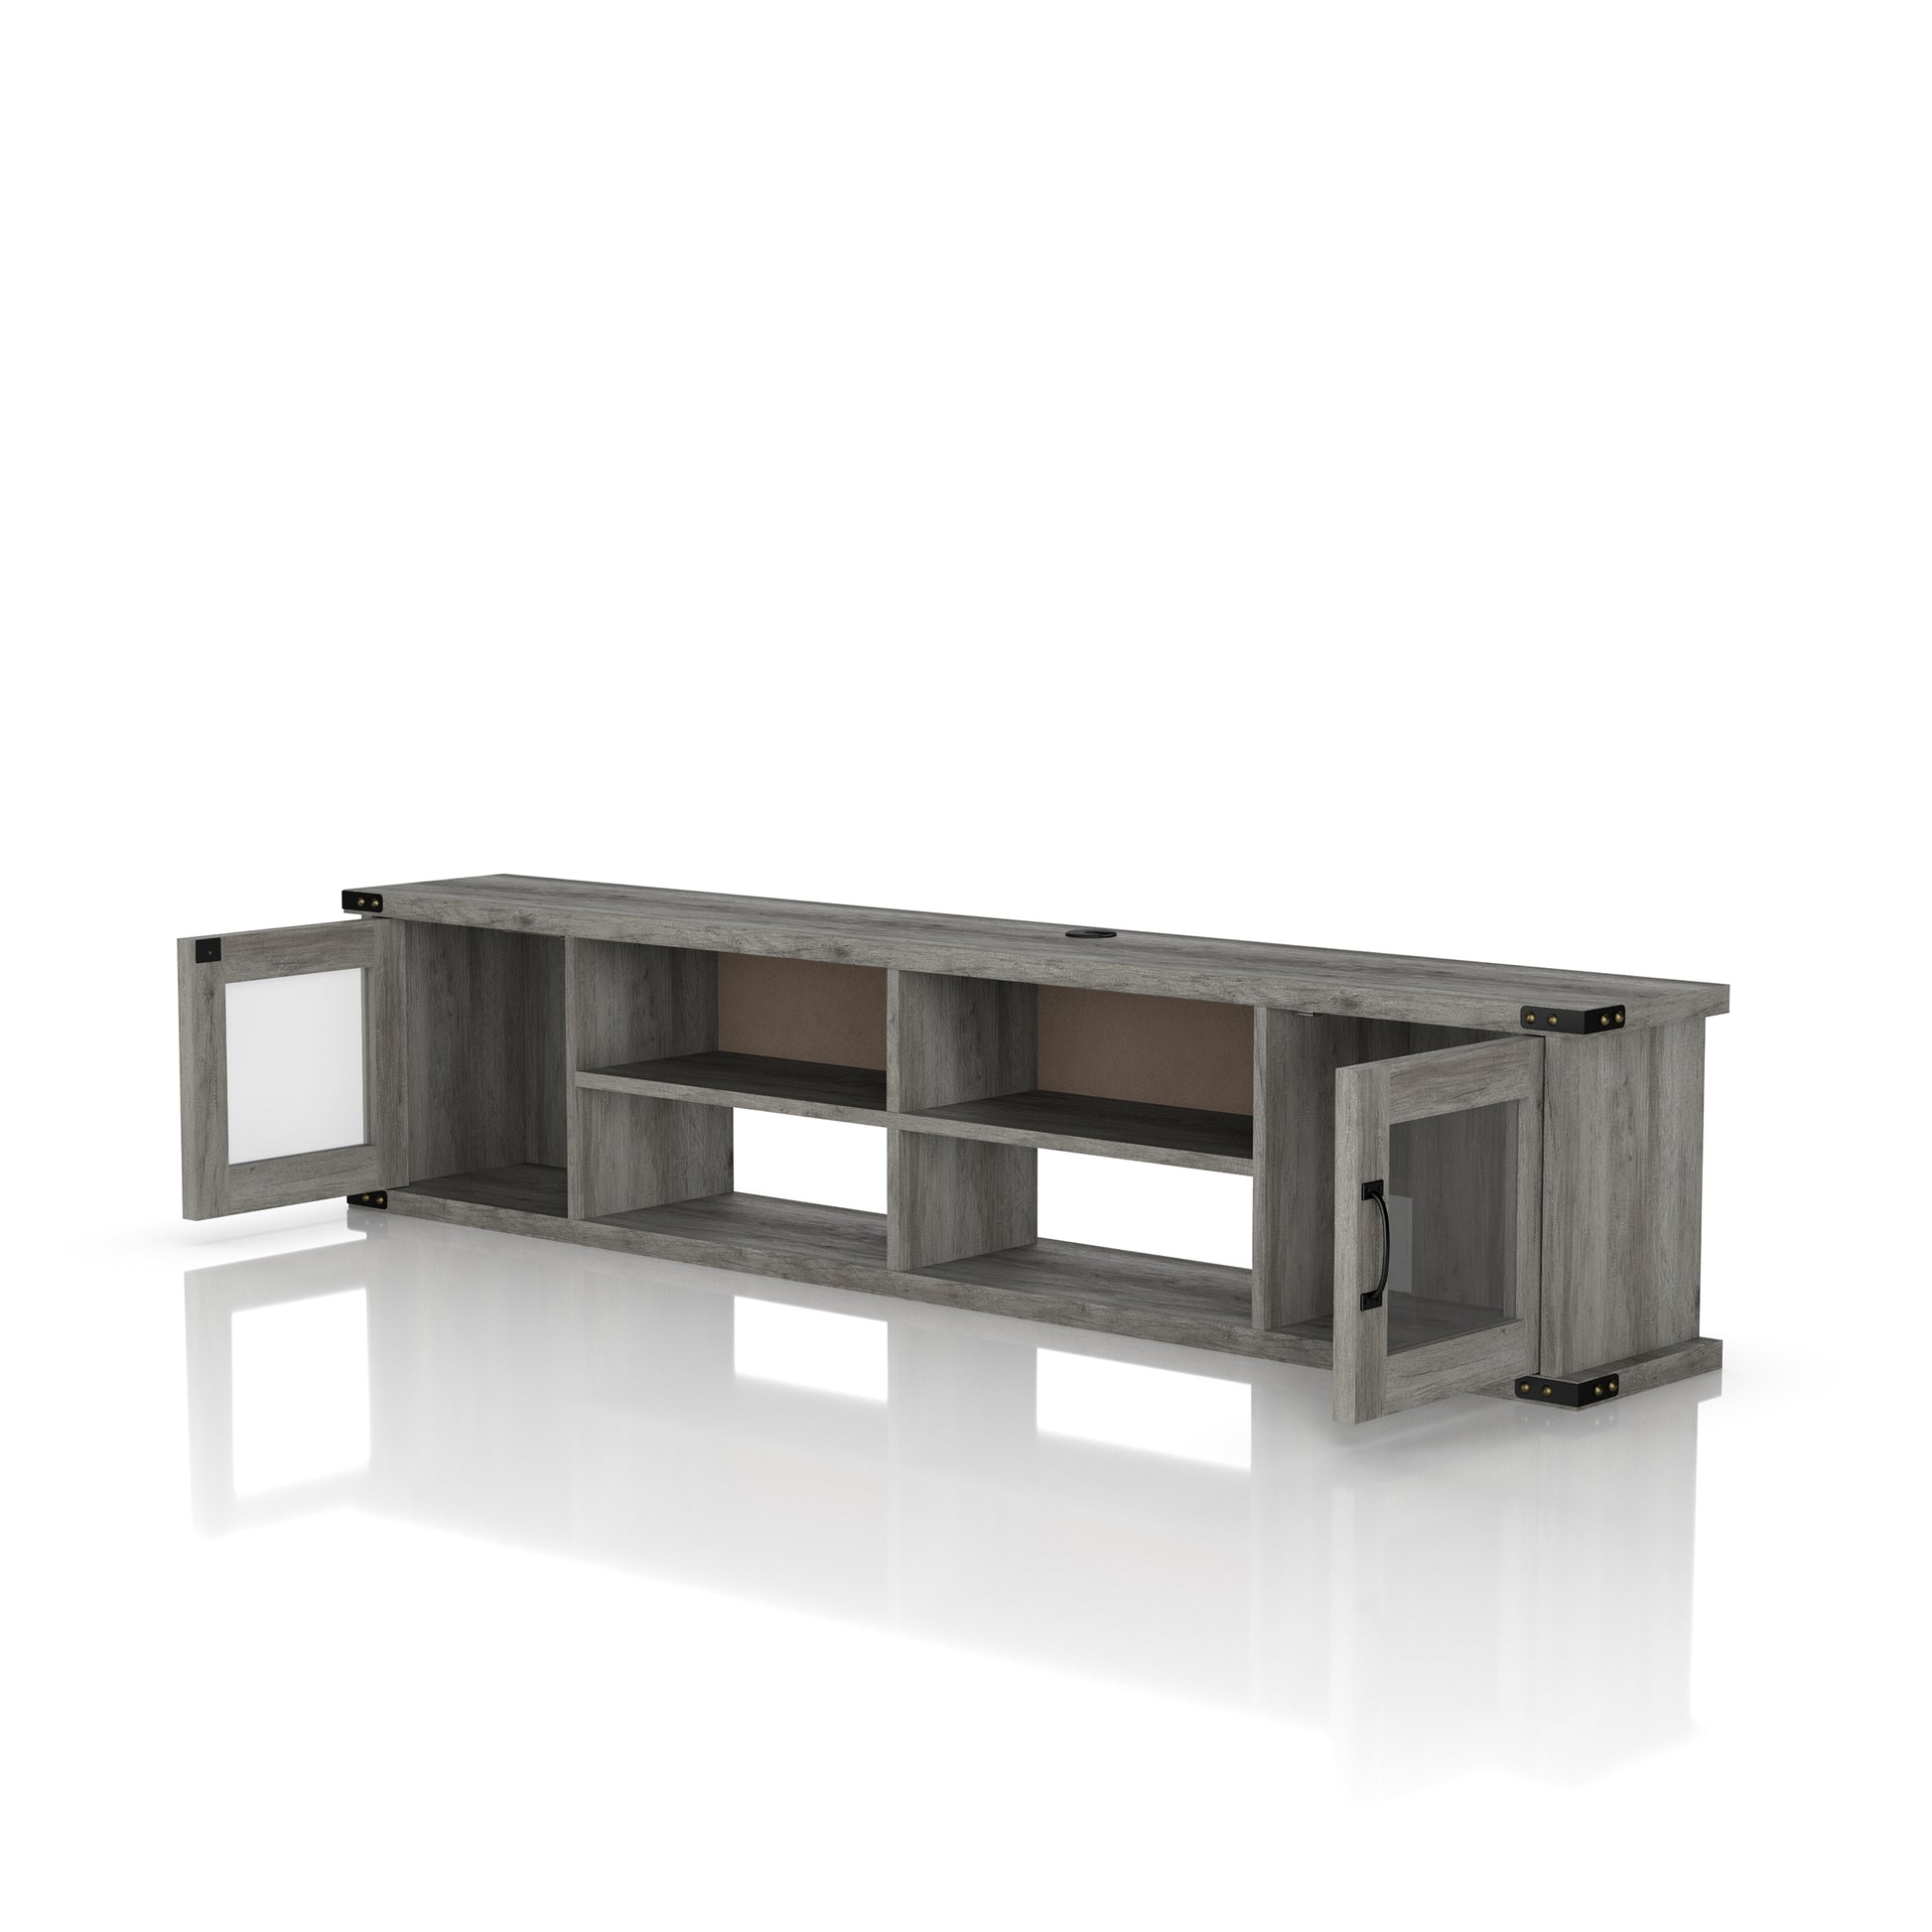 Left angled modern vintage gray oak four-shelf wall mountable TV stand with glass doors open on a white background